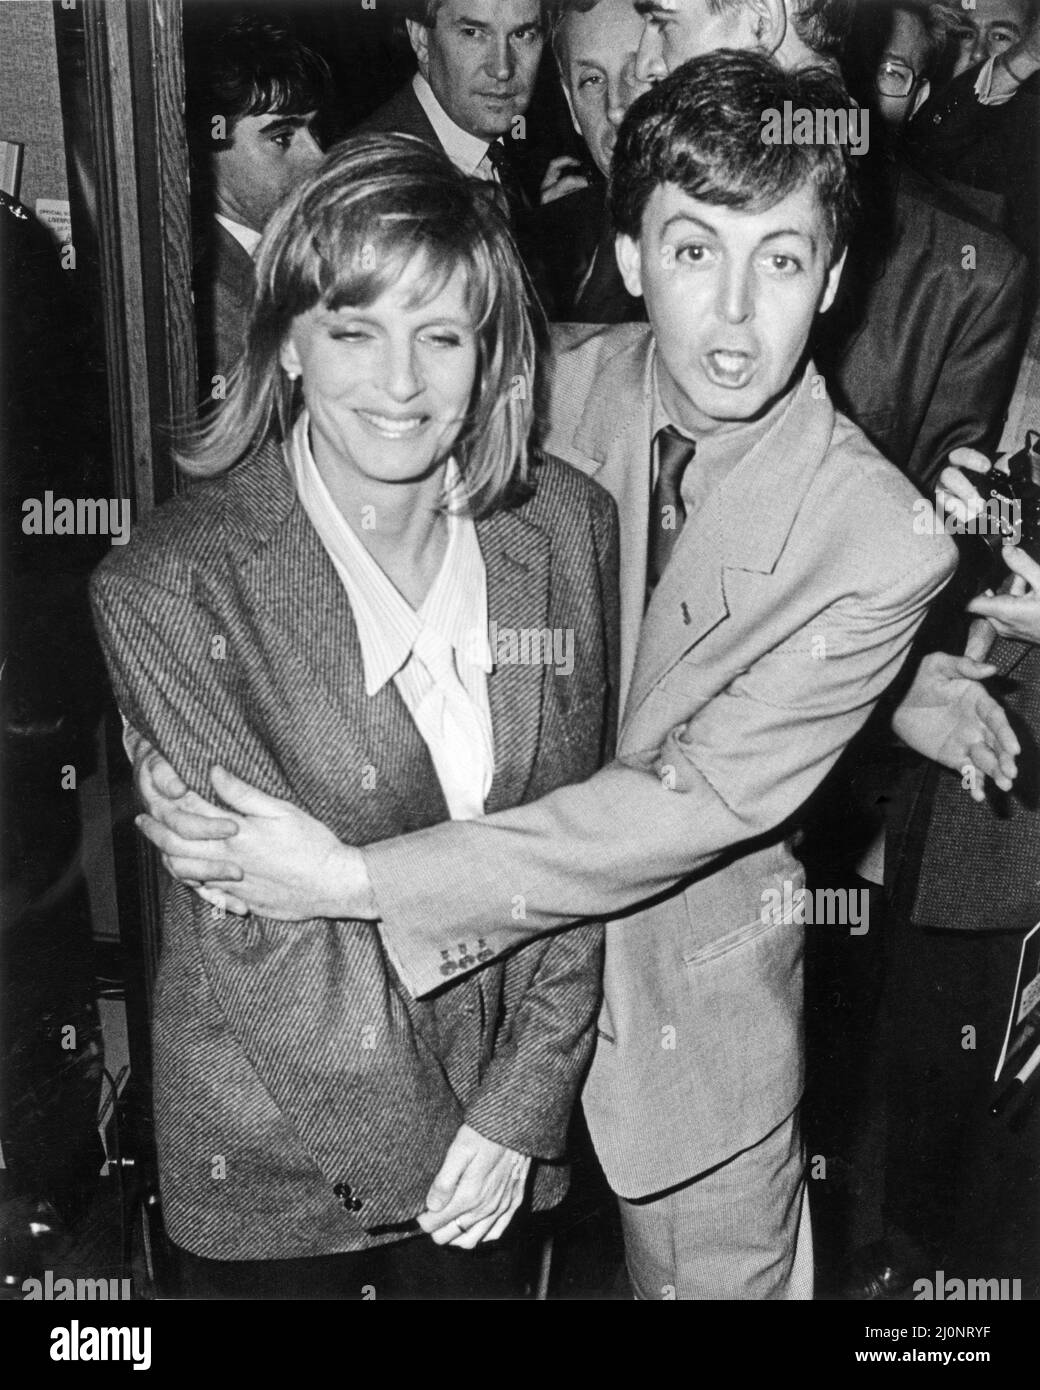 Paul McCartney, in Liverpool, on the day he receives the title of Honorary Freedom of the City of Liverpool.Paul is on arrival at The Picton Library, with his wife Linda McCartney.  Picture taken 28th November 1984. Stock Photo